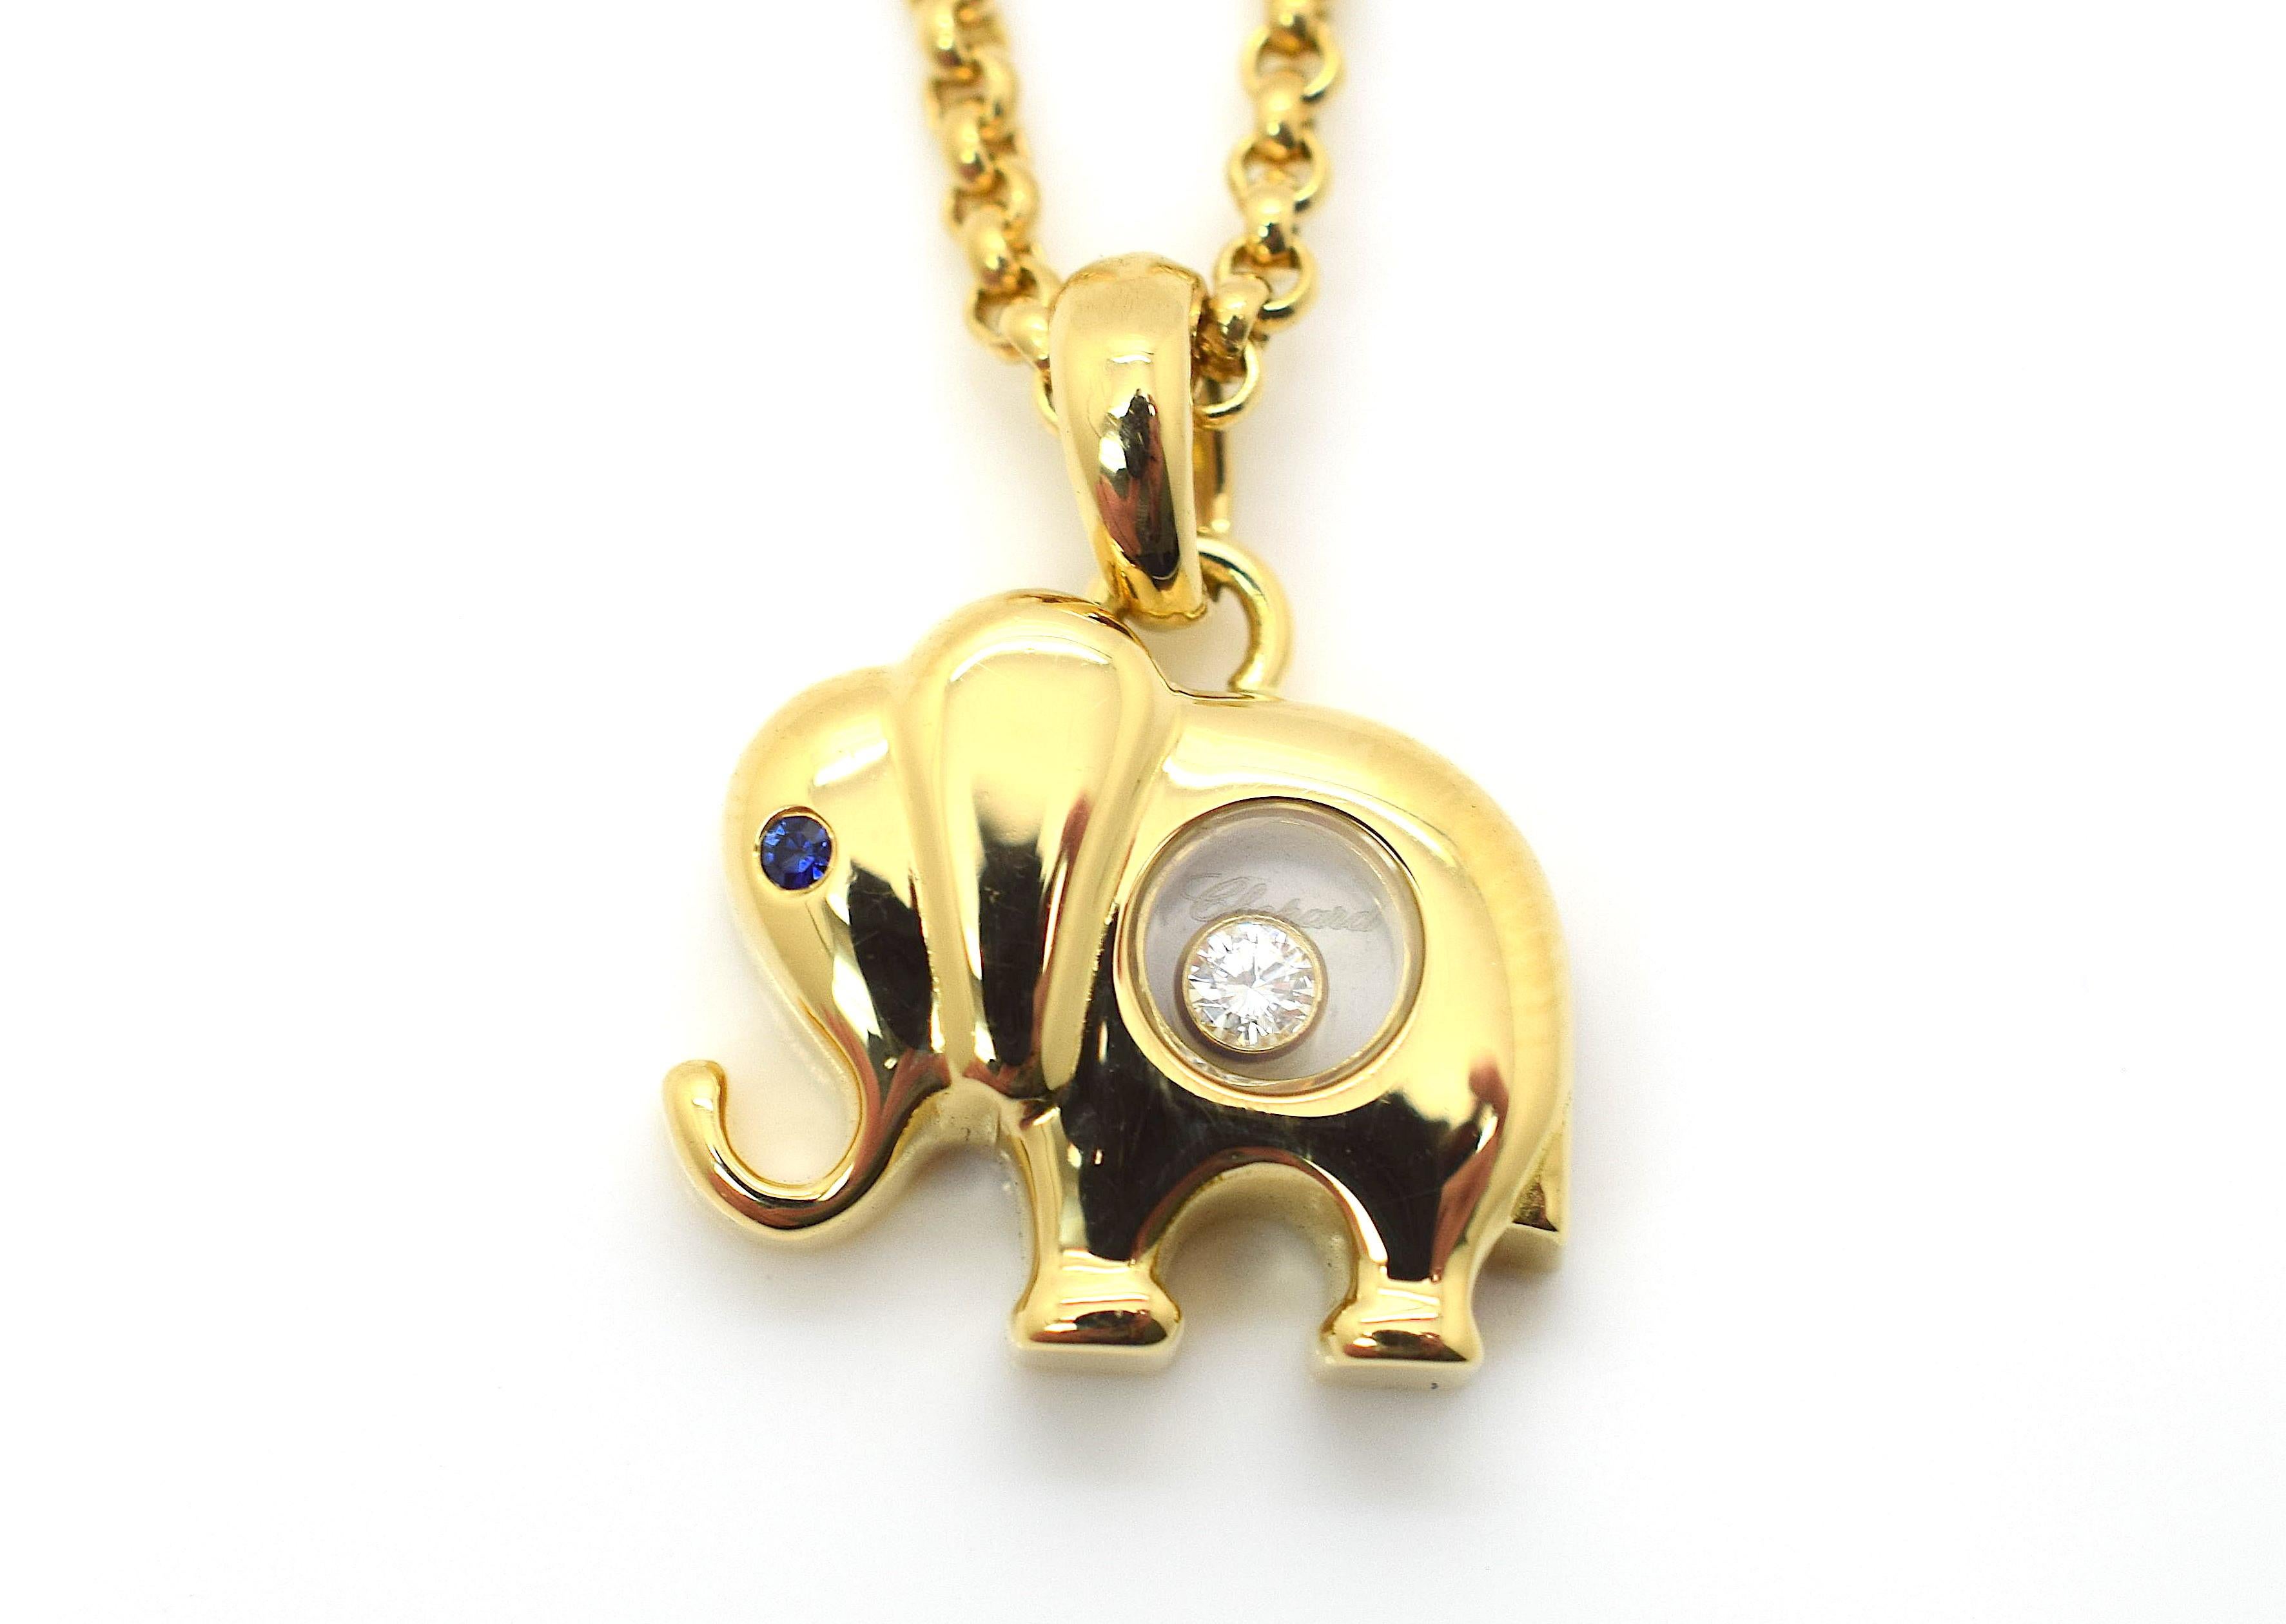 This is a beautiful authentic necklace by Chopard from the Happy Diamond collection, it is crafted from solid 18k yellow gold with a high polished finish. The elephants eye is a small round sapphire and in the center of its body is a round glass